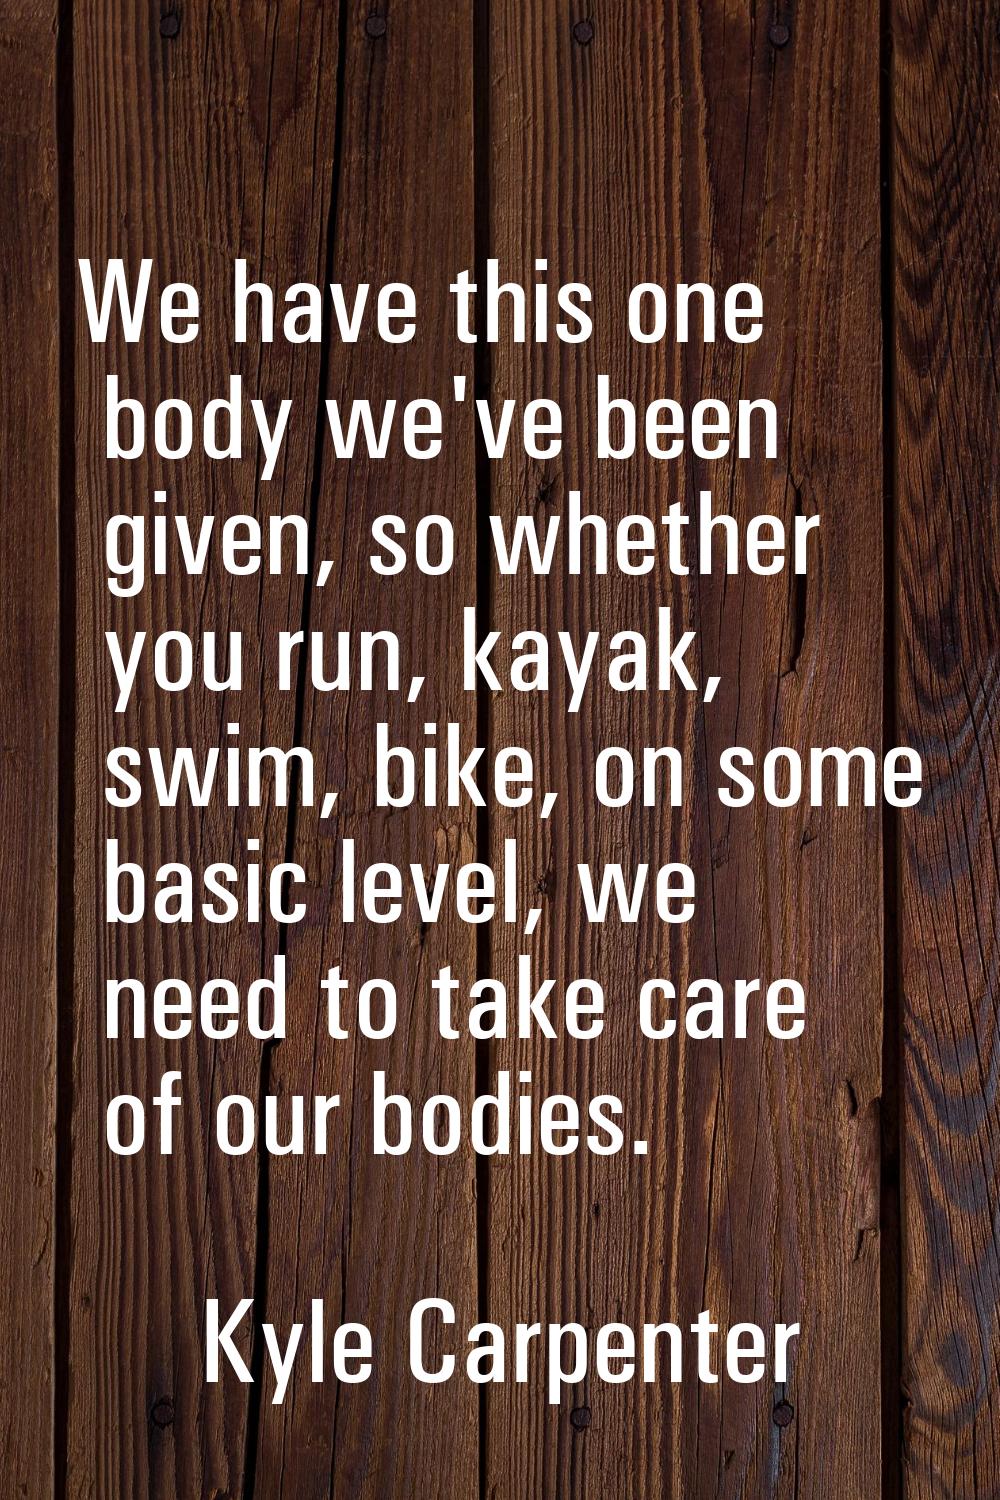 We have this one body we've been given, so whether you run, kayak, swim, bike, on some basic level,